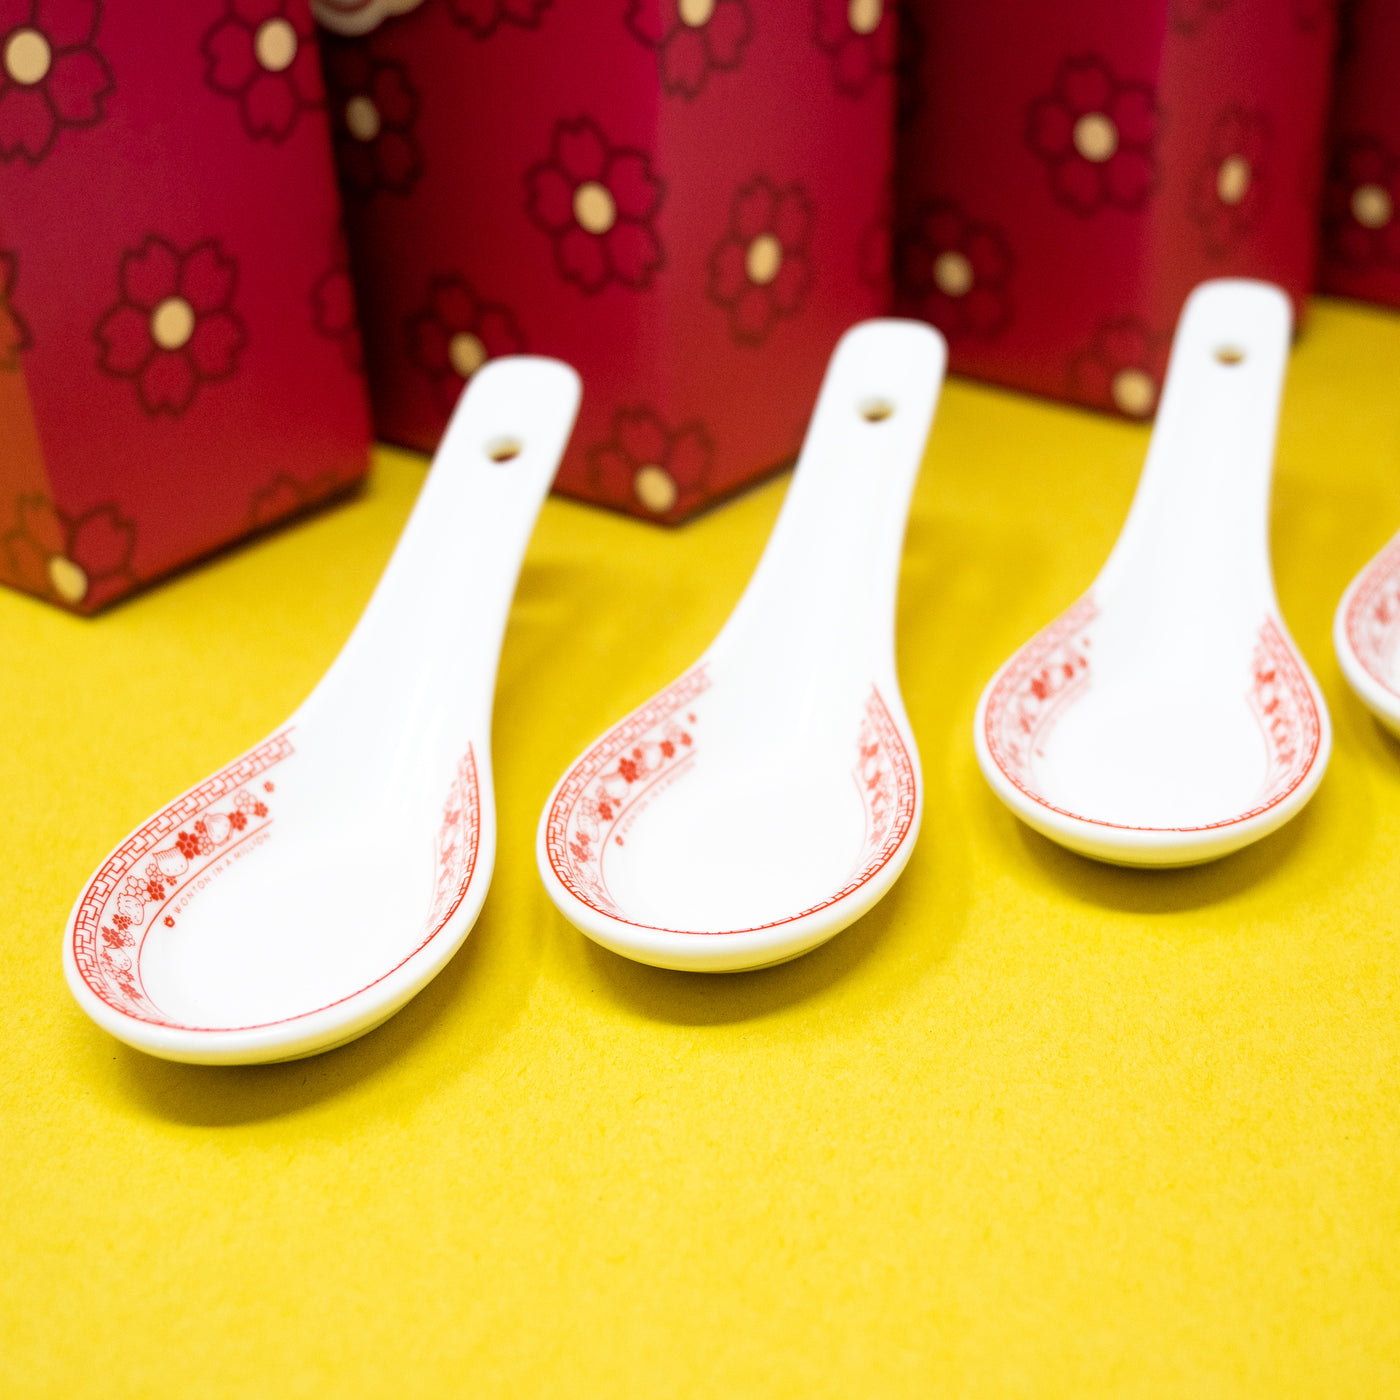 MISC088 | Year Of The Dragon [DAY 8] - Lucky Ceramic Soup Spoon